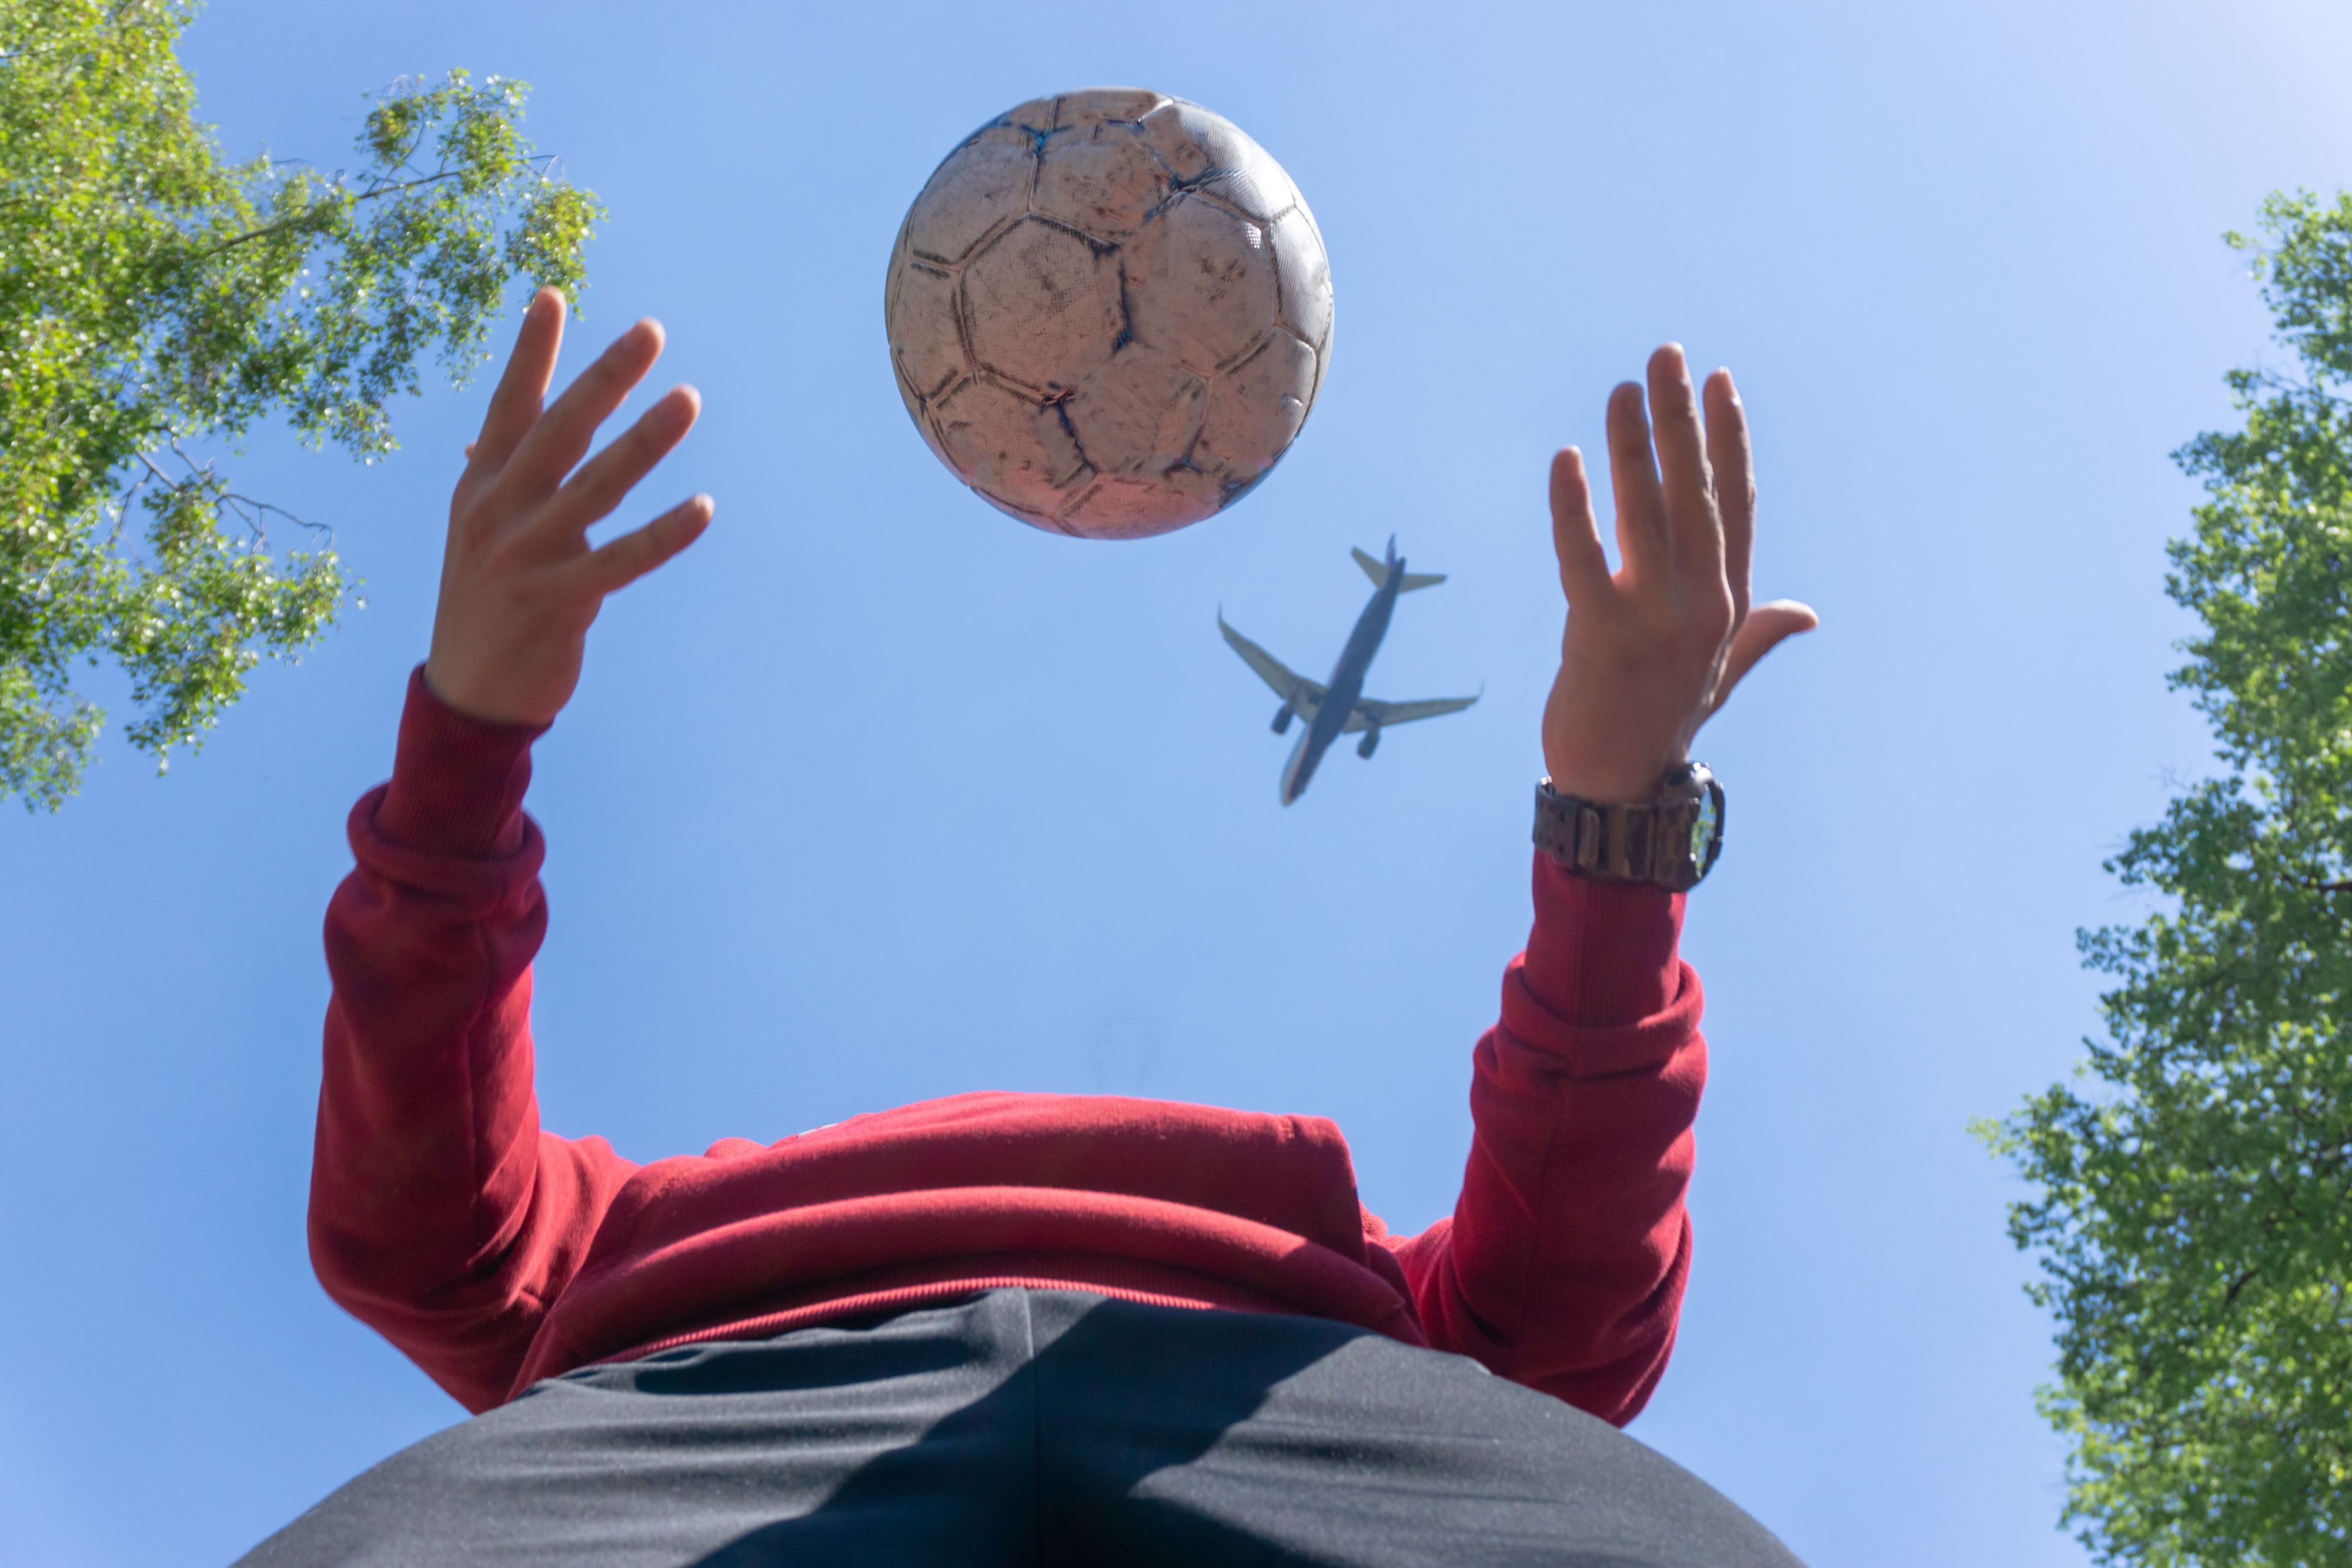 someone using a football at a park as an aircraft travels overhead.